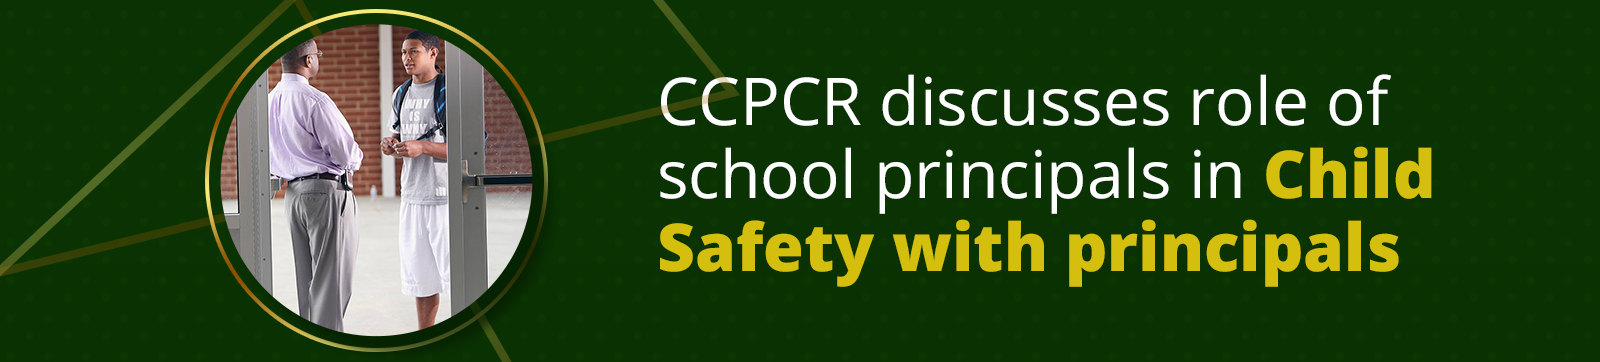 CCPCR Discusses Role of School Principals in Child Safety with Principals